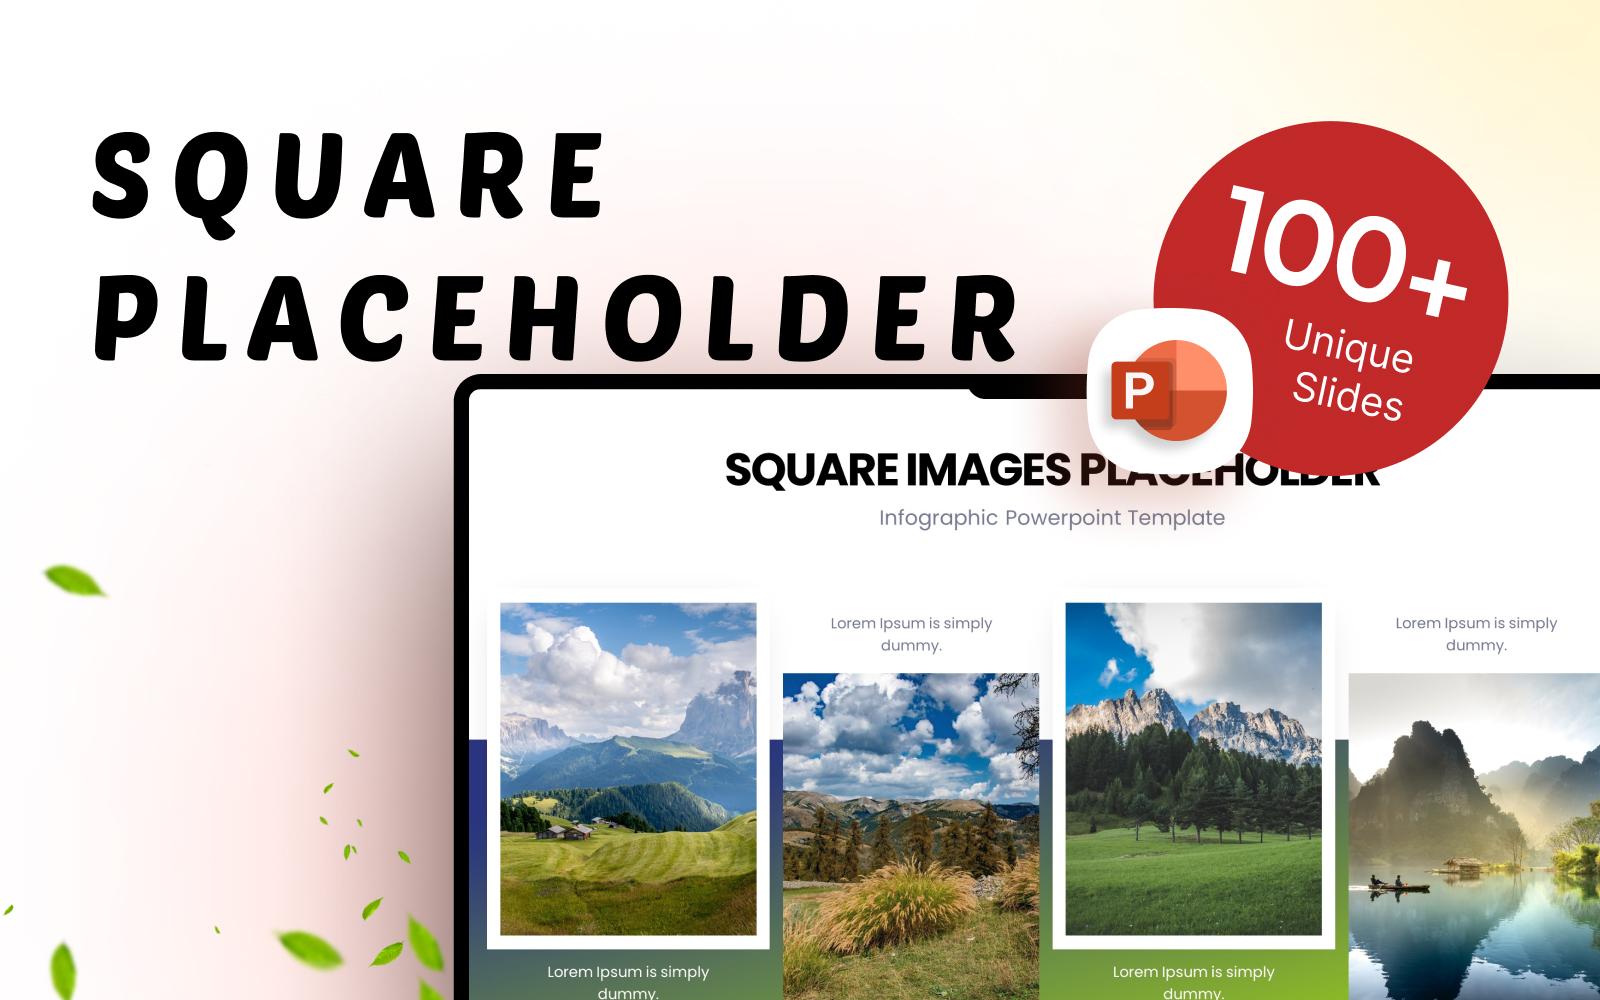 Square Image Placeholder Infographic Presentation Template